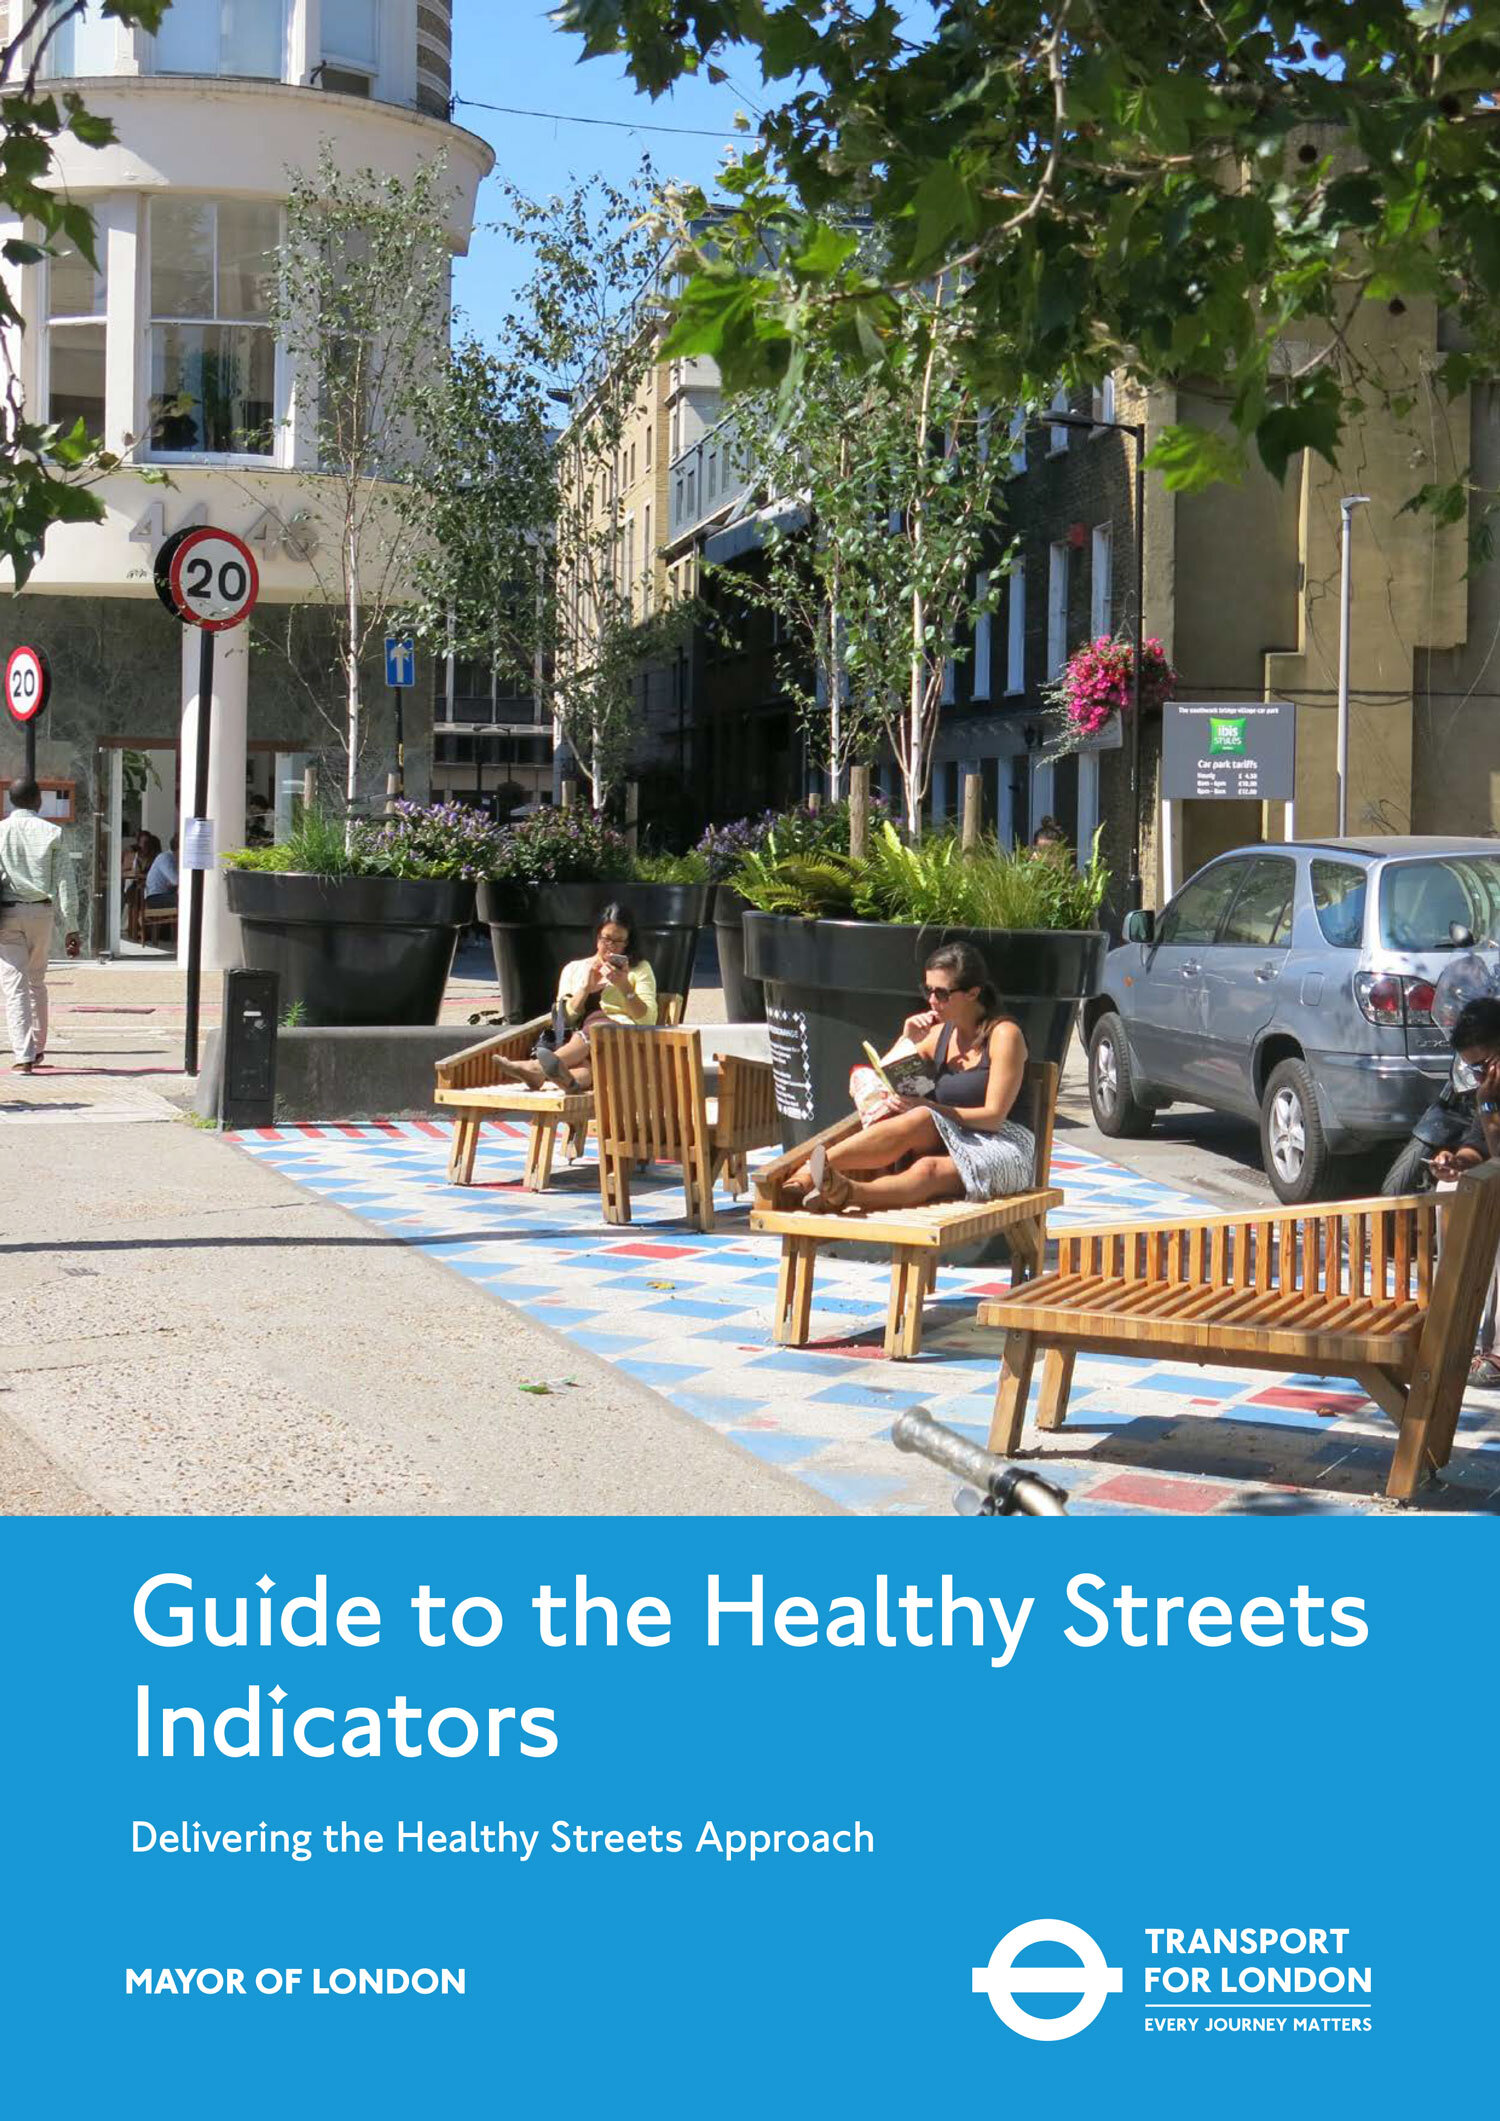 guide-to-the-healthy-streets-indicators-1.jpg